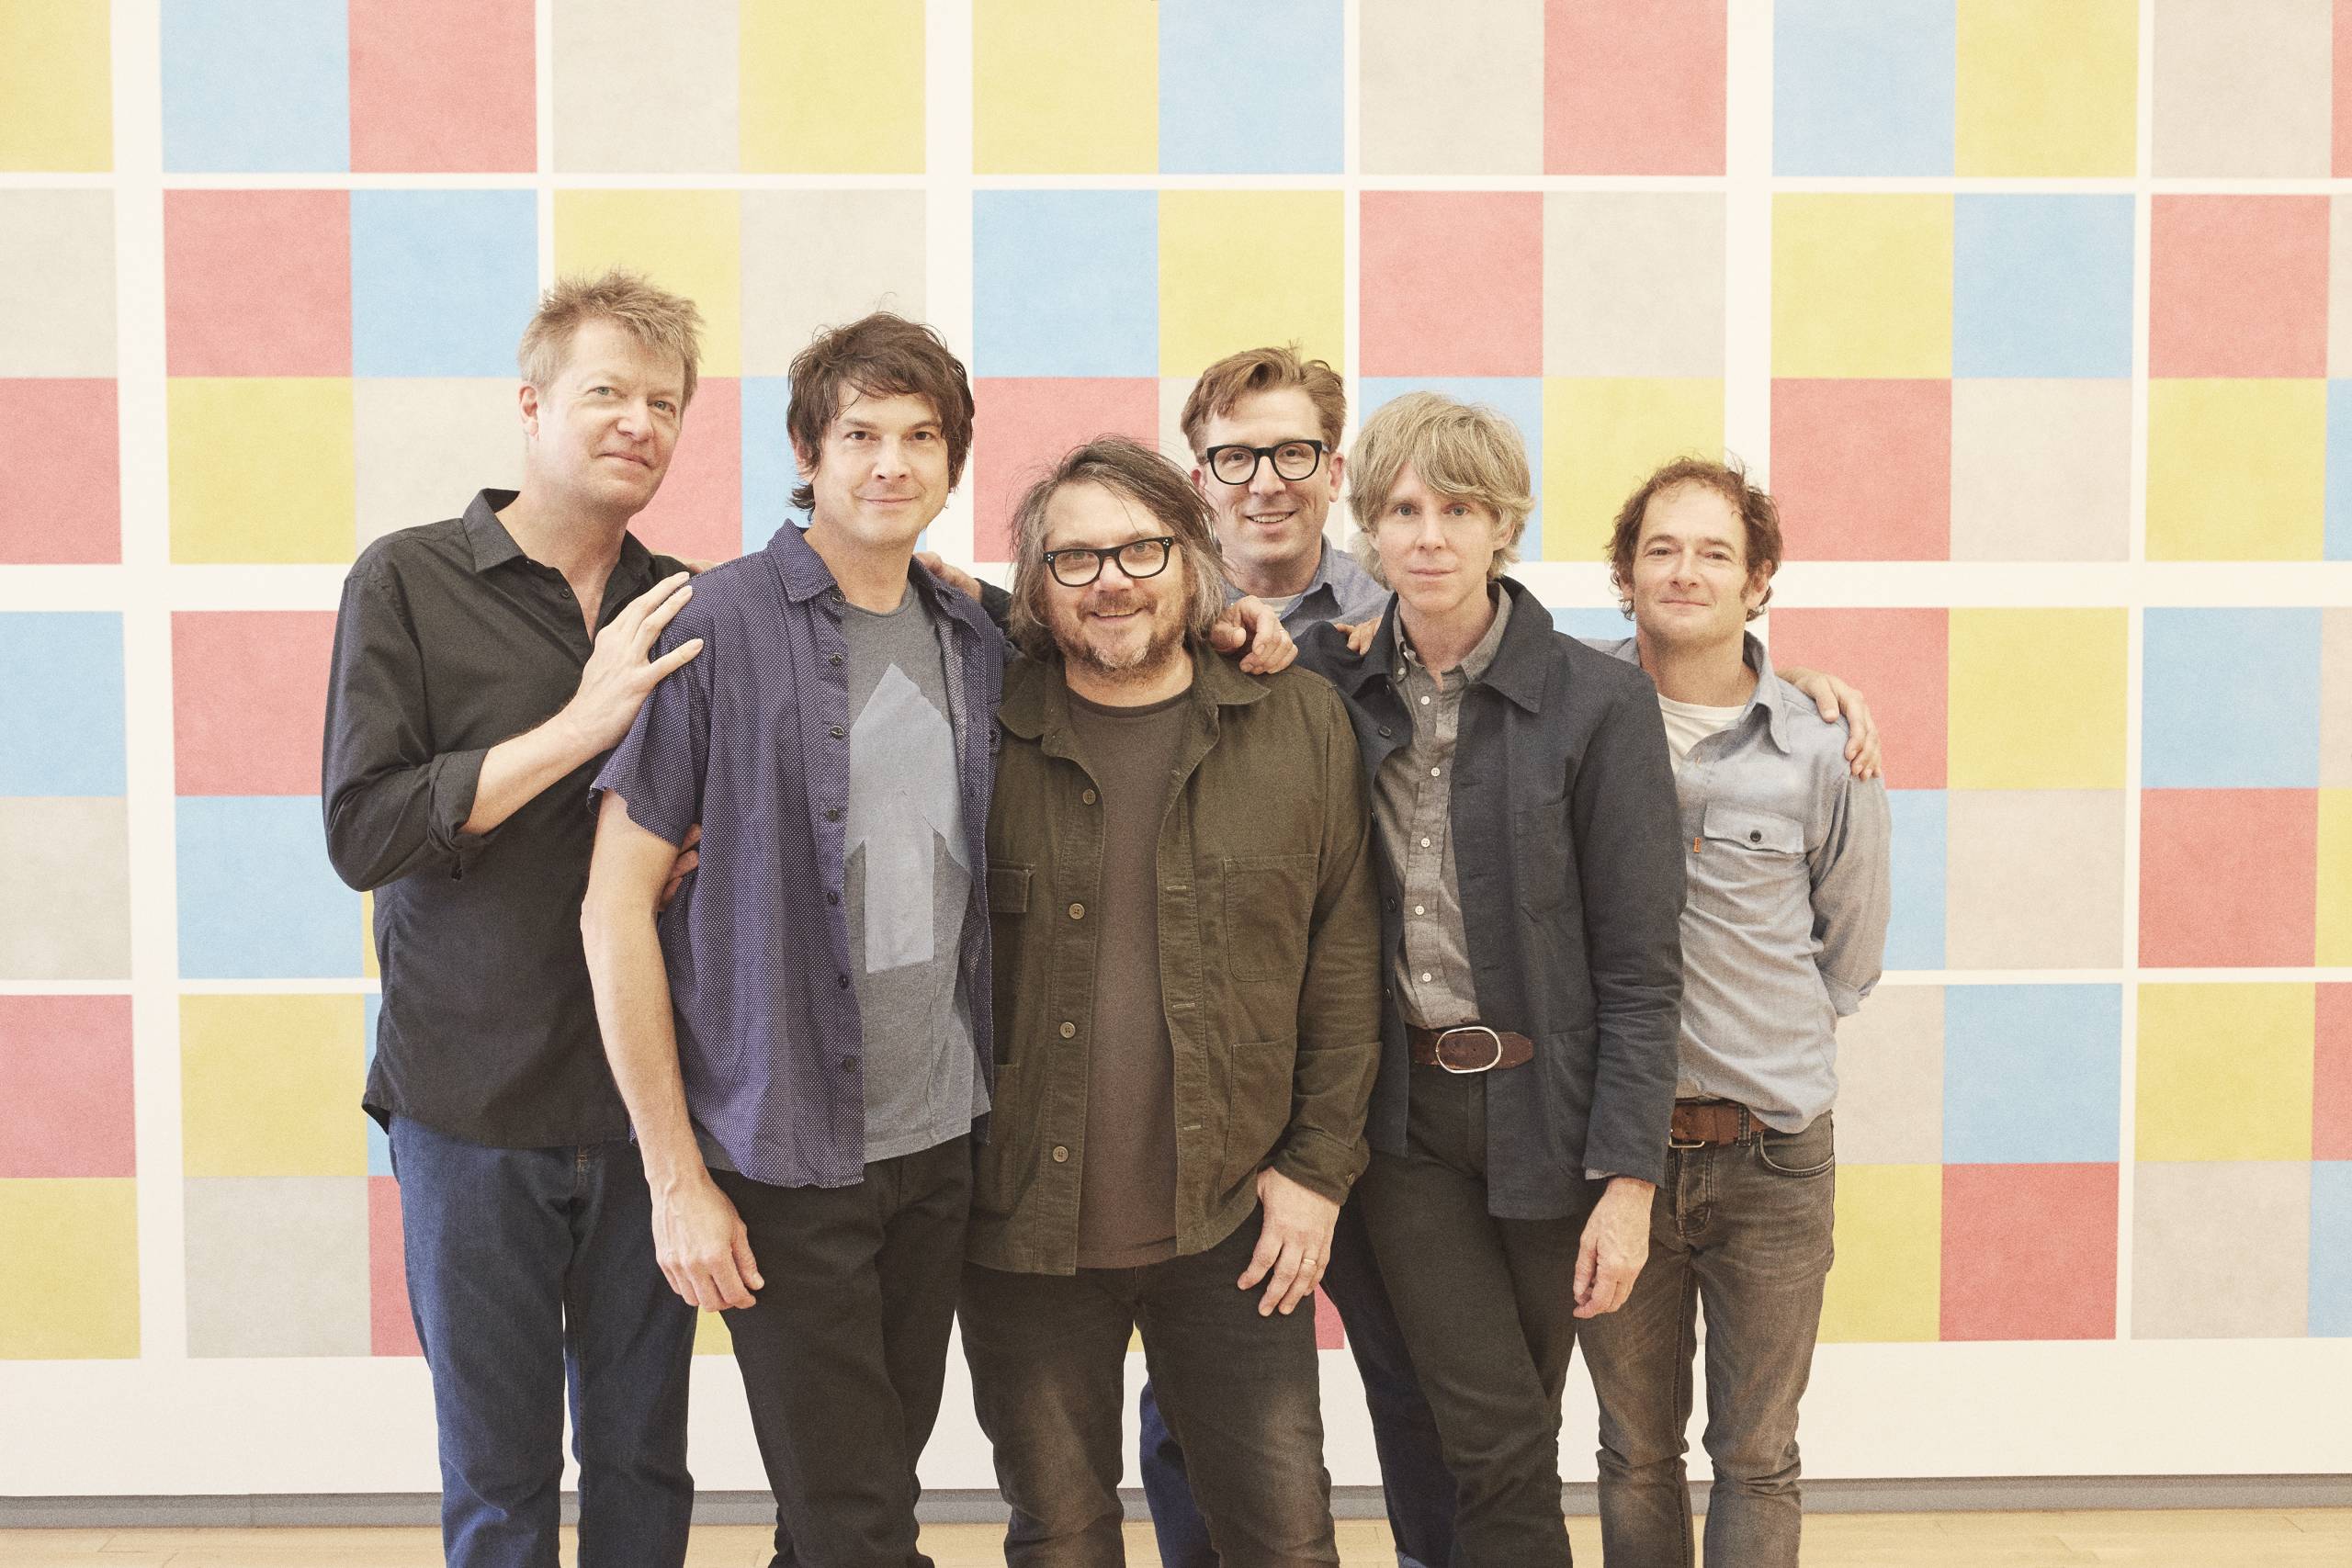 The members of the band Wilco standing in a row in front of a wall of colorful squares.